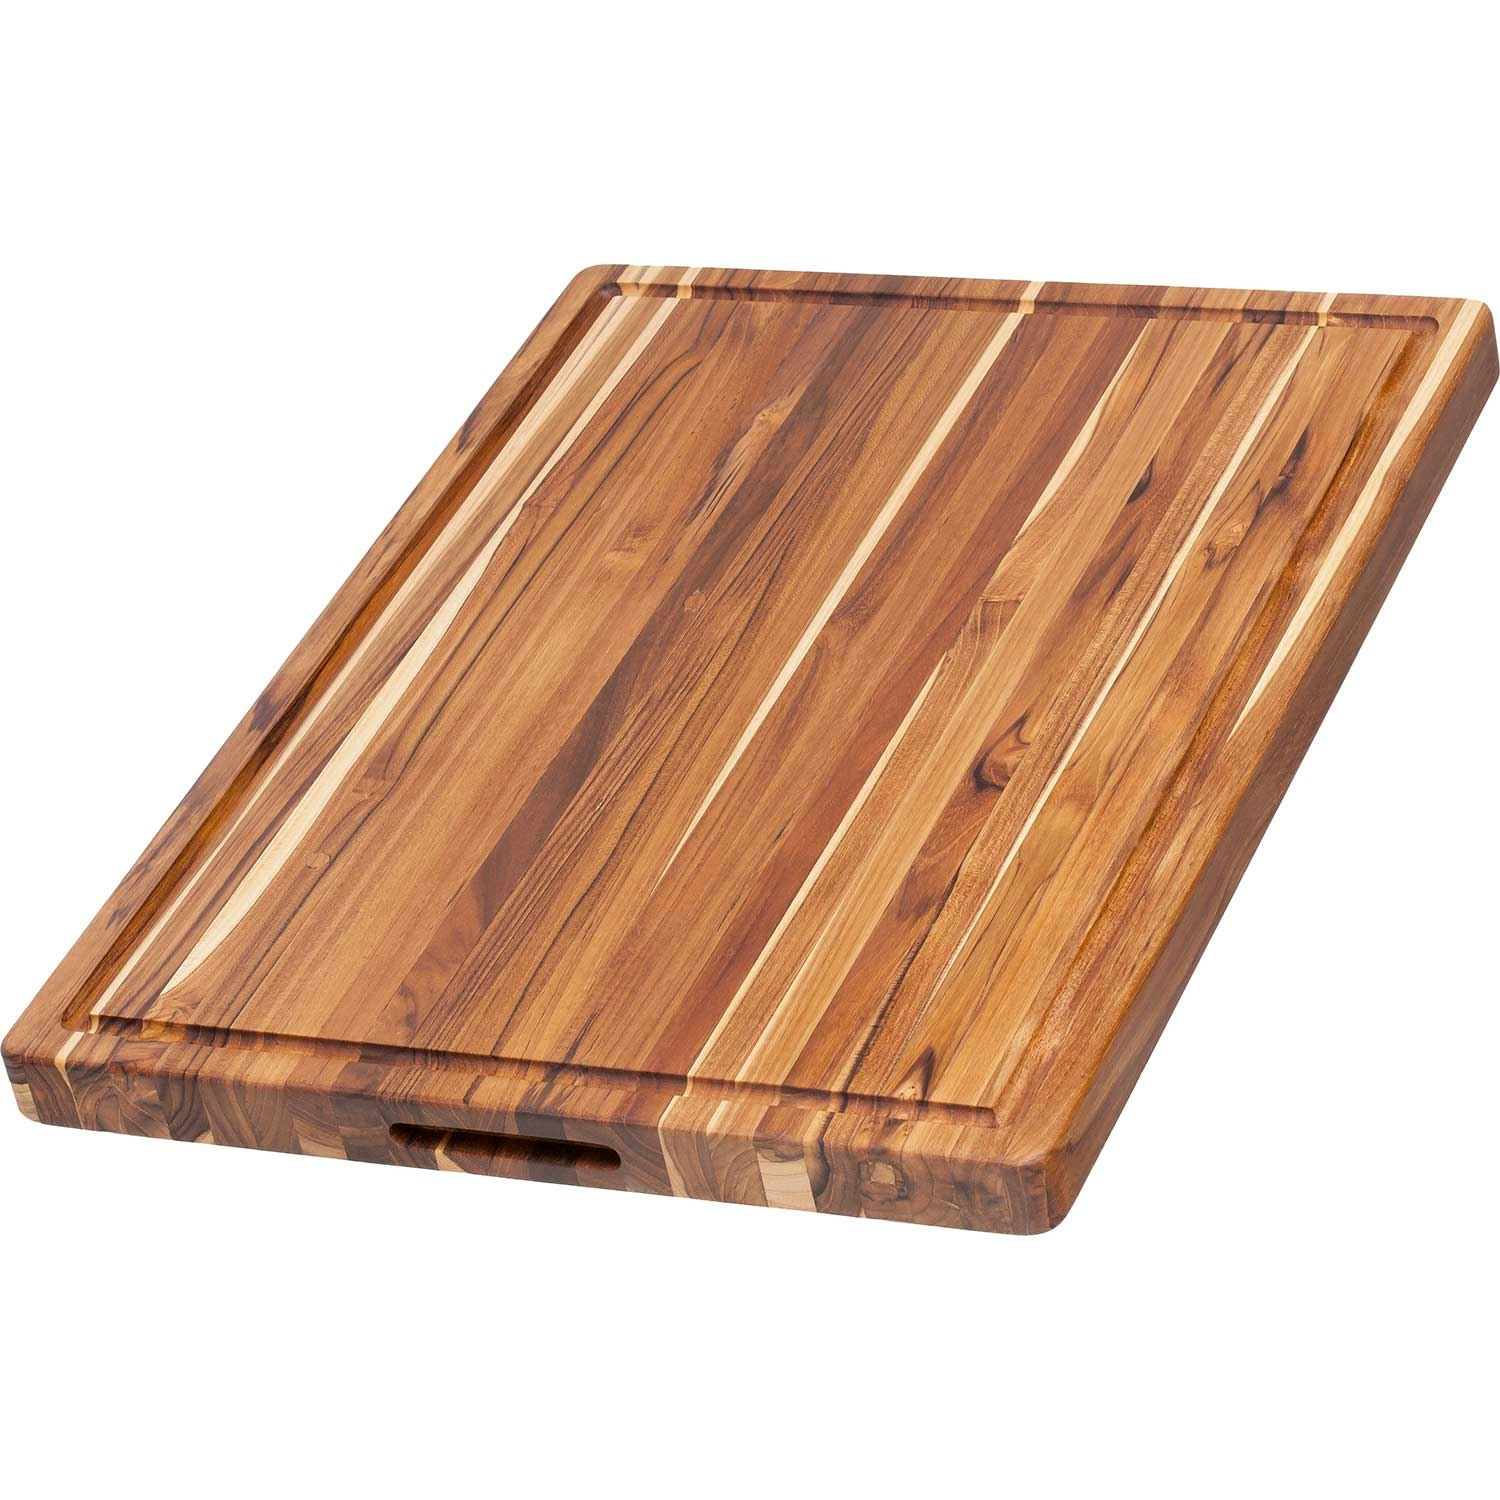 Belmint Chopping and Serving Bamboo Cutting Board & Reviews